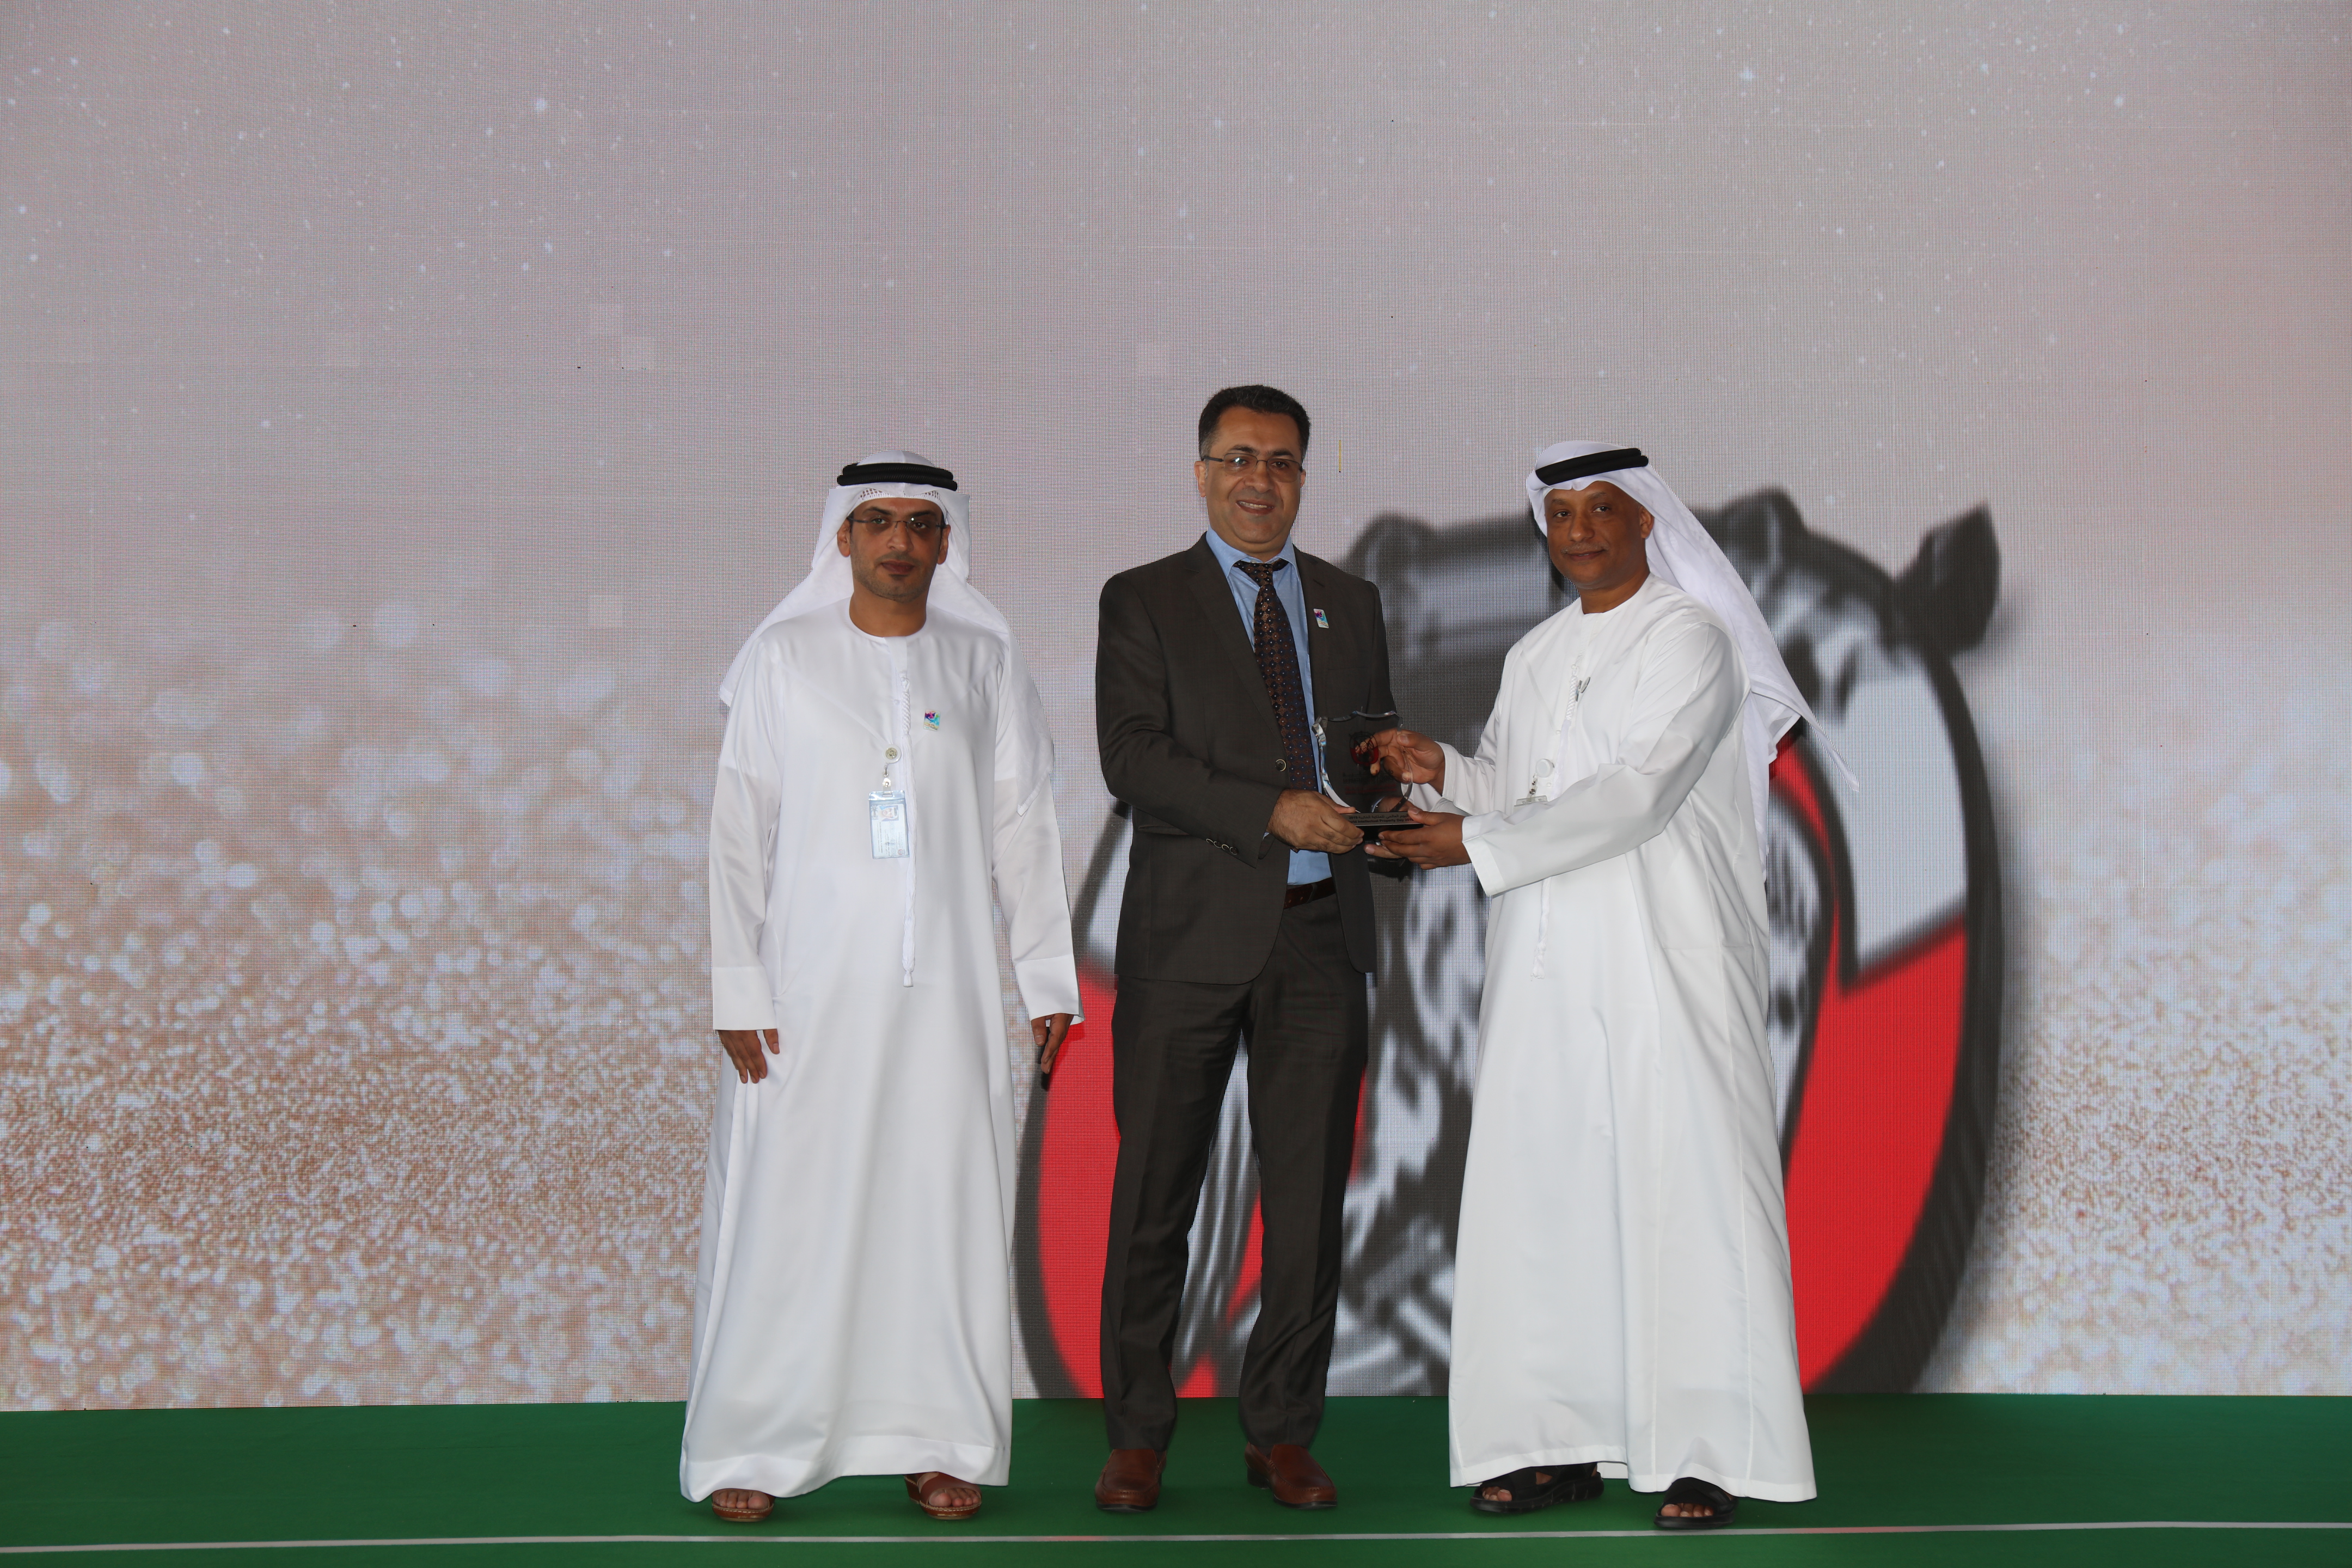 Al Masaood Automobiles honored with prestigious award by the General Administration of Customs of Abu Dhabi